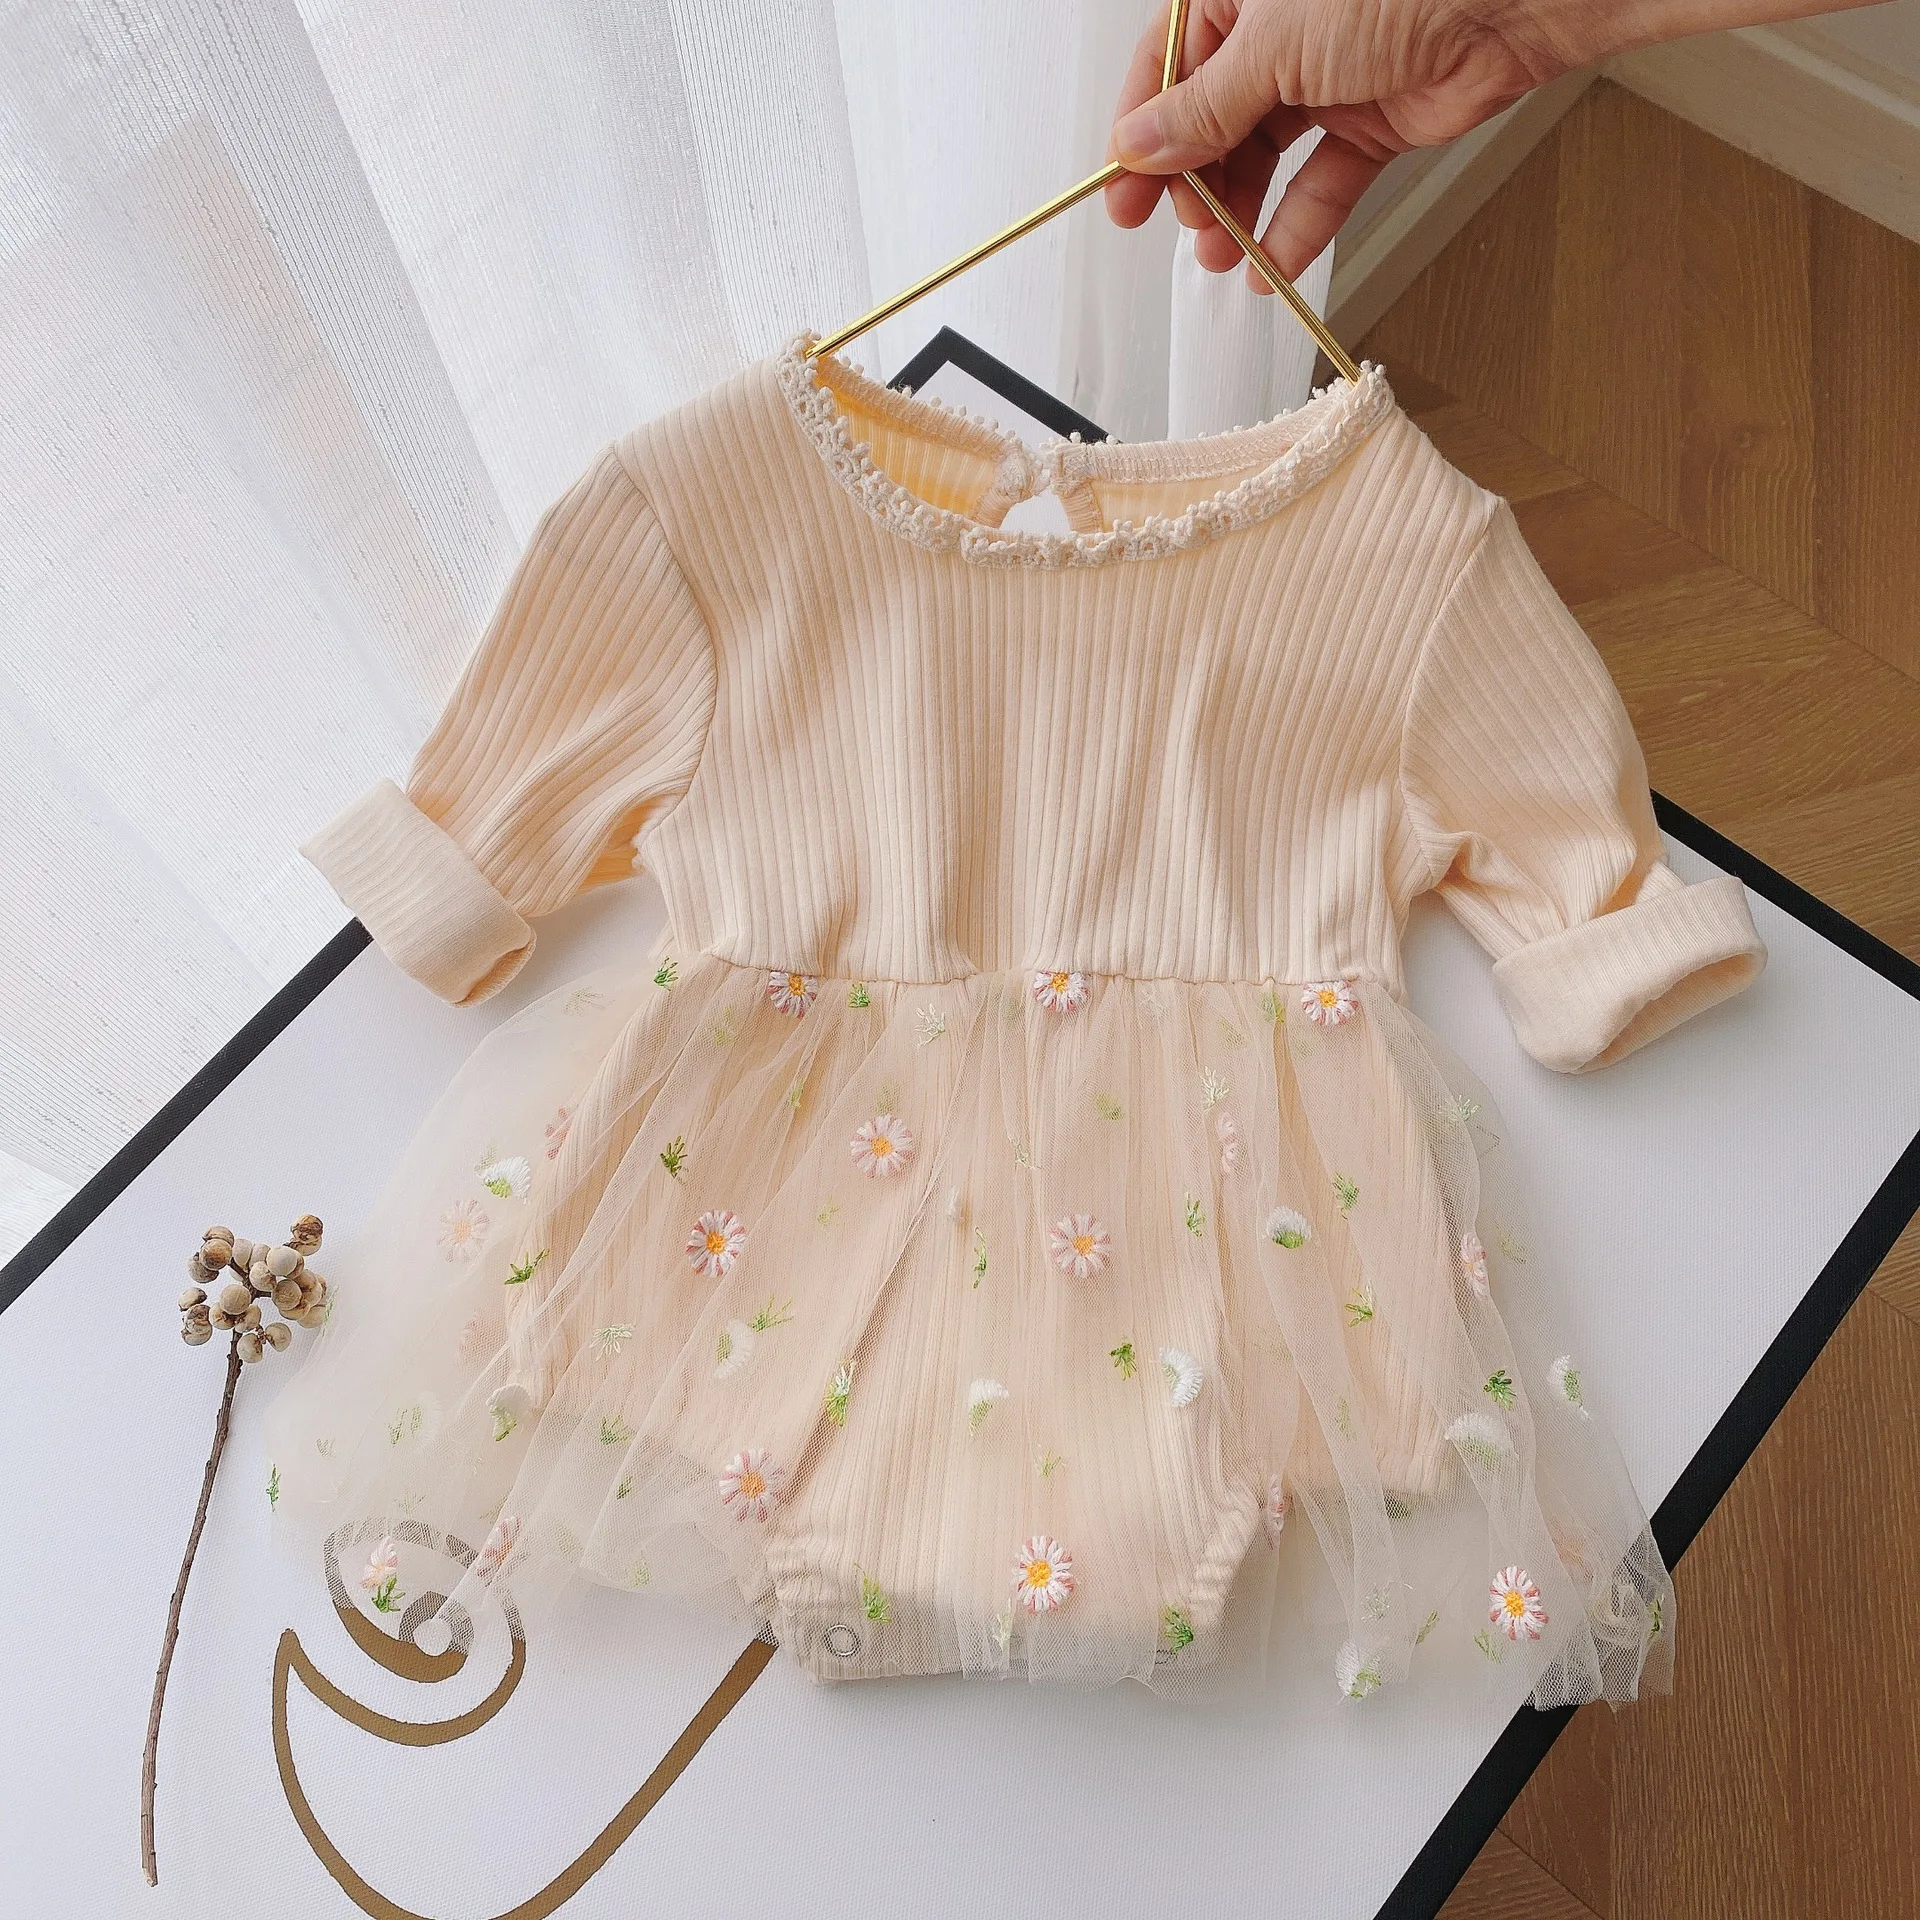 

Newborn Baby Girls Clothes Lace Bodysuit Tiered Flower Tutu Cotton Long Sleeve Patchwork Casual Outfits 0-18M